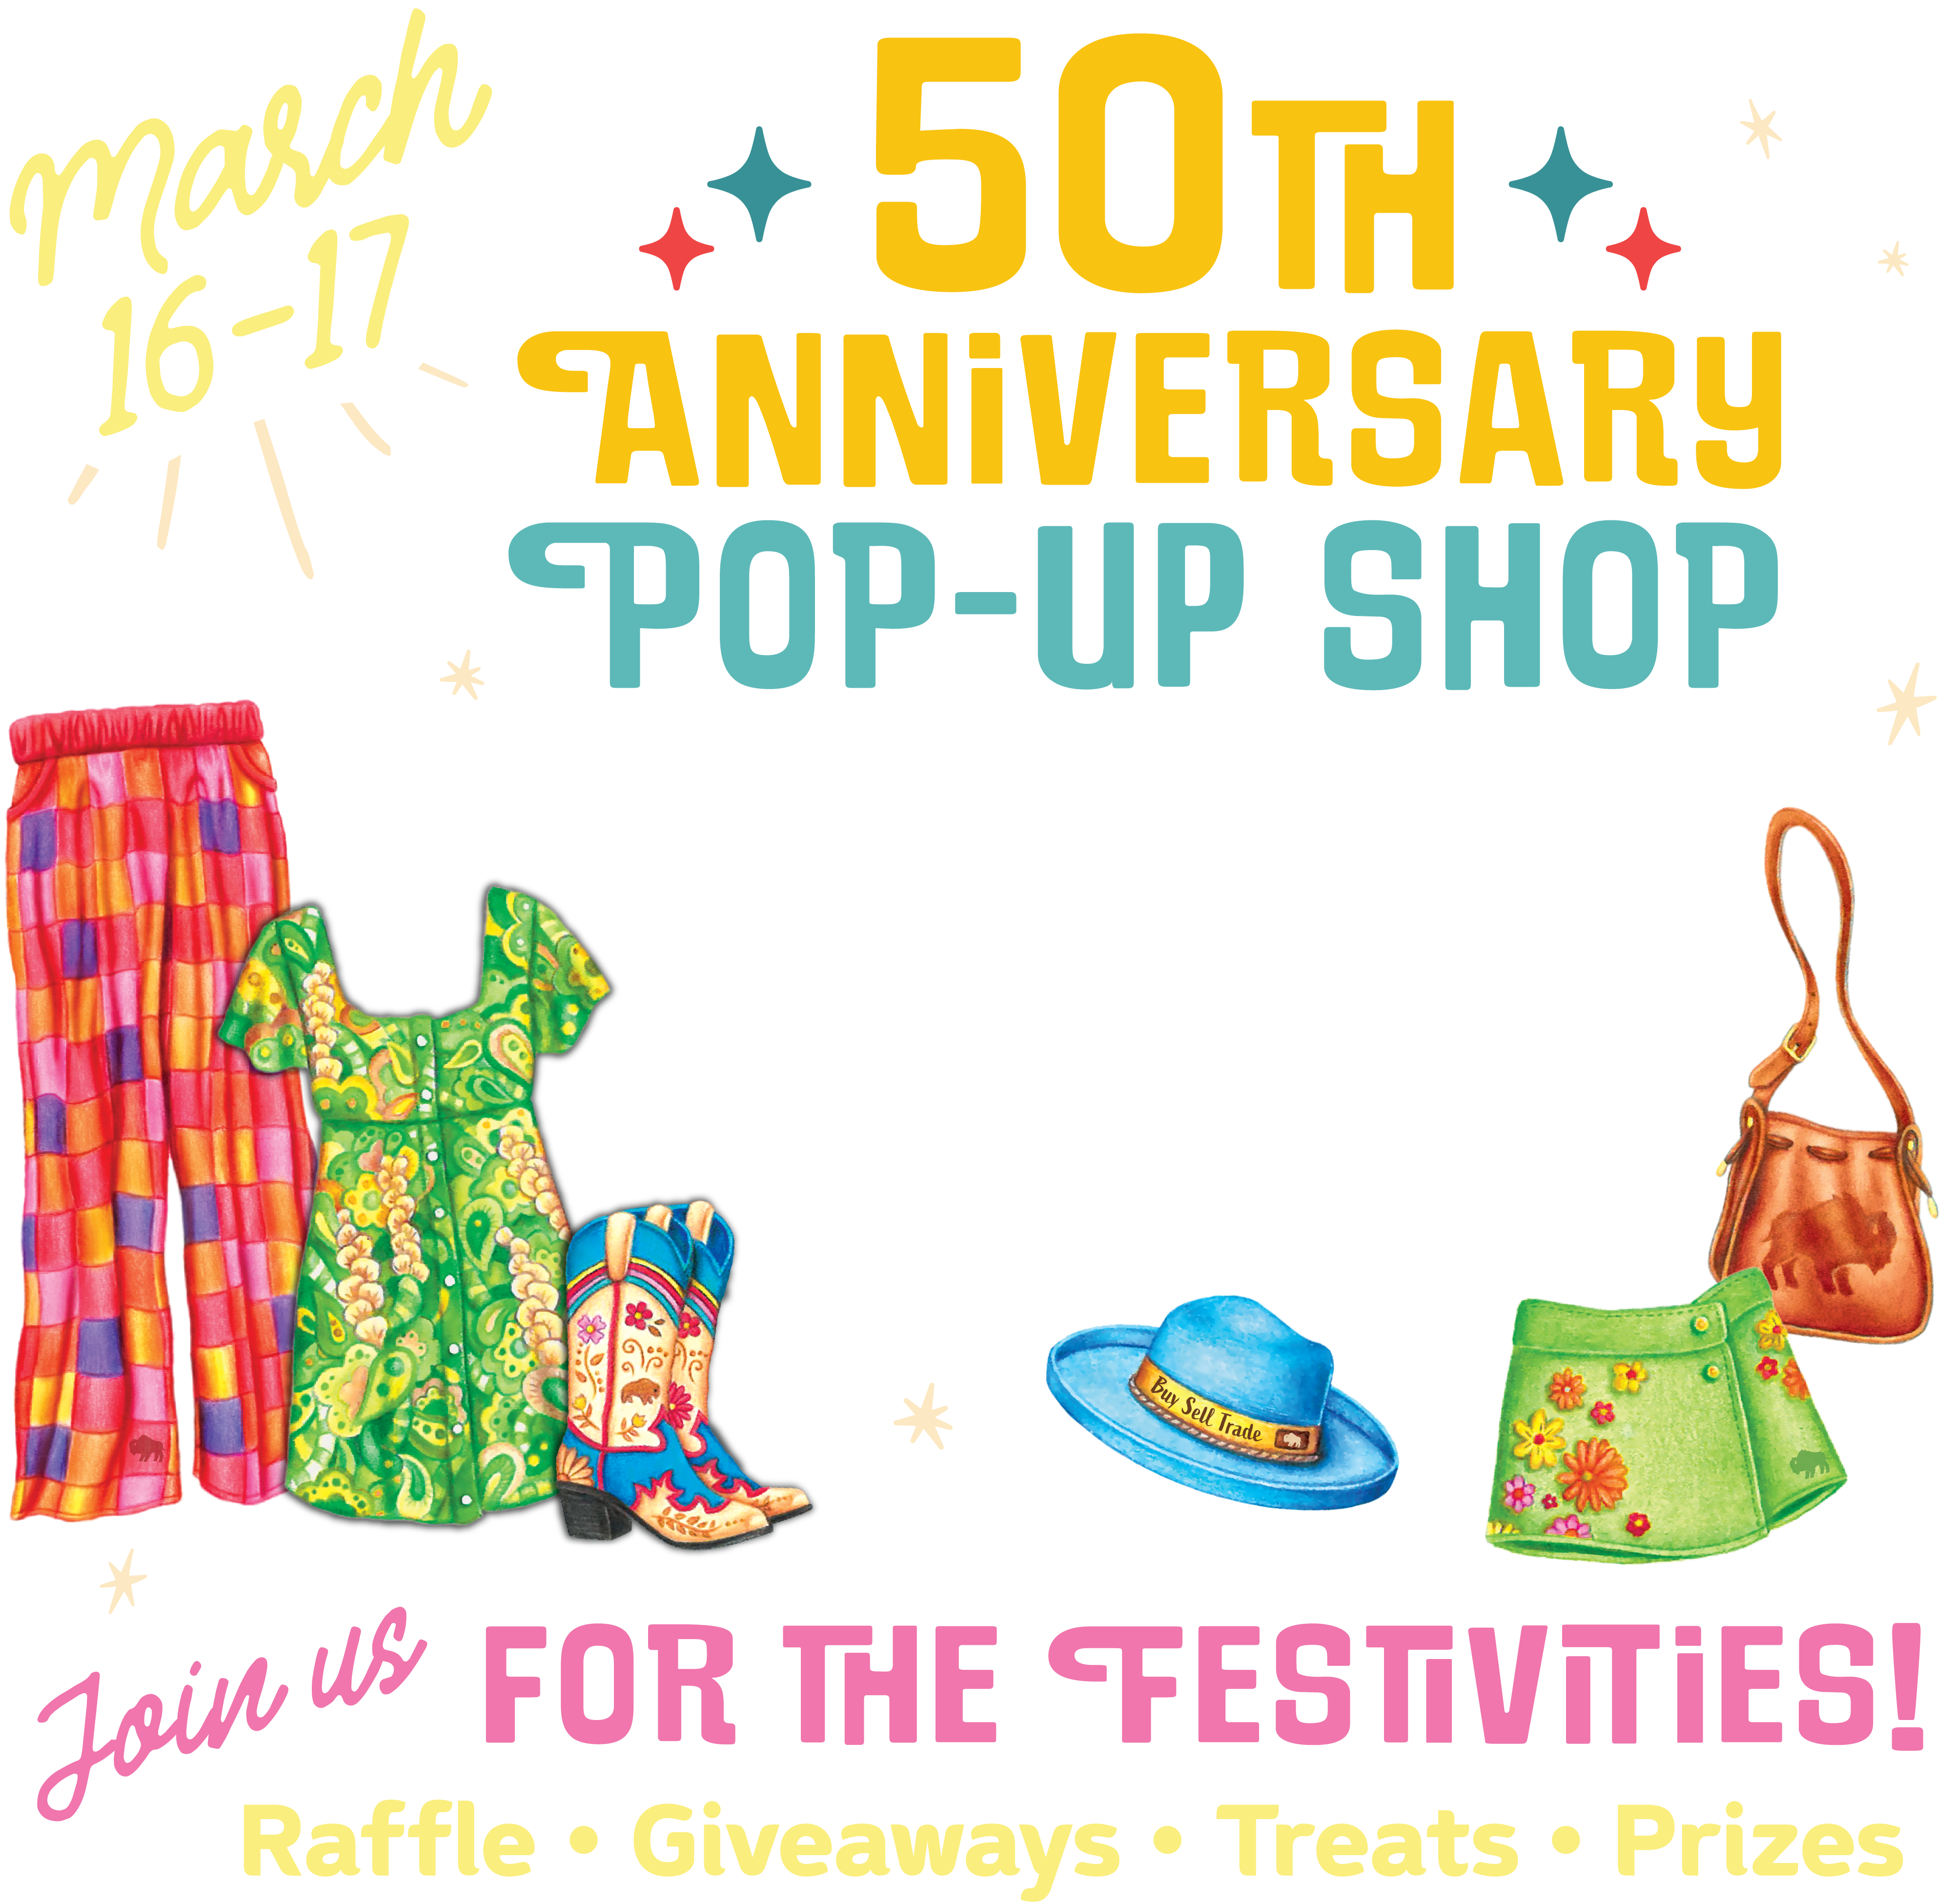 March 16-17 50th Anniversary pop-Up Shop Shop a special selection of curated treasures! The best of the best at Buffalo Exchange. Designer Vintage Trenday One-of-a-kind finds. Join us for the festivities. Raffle, giveaways, treats, prizes. Graphic with illustrated vintage clothes